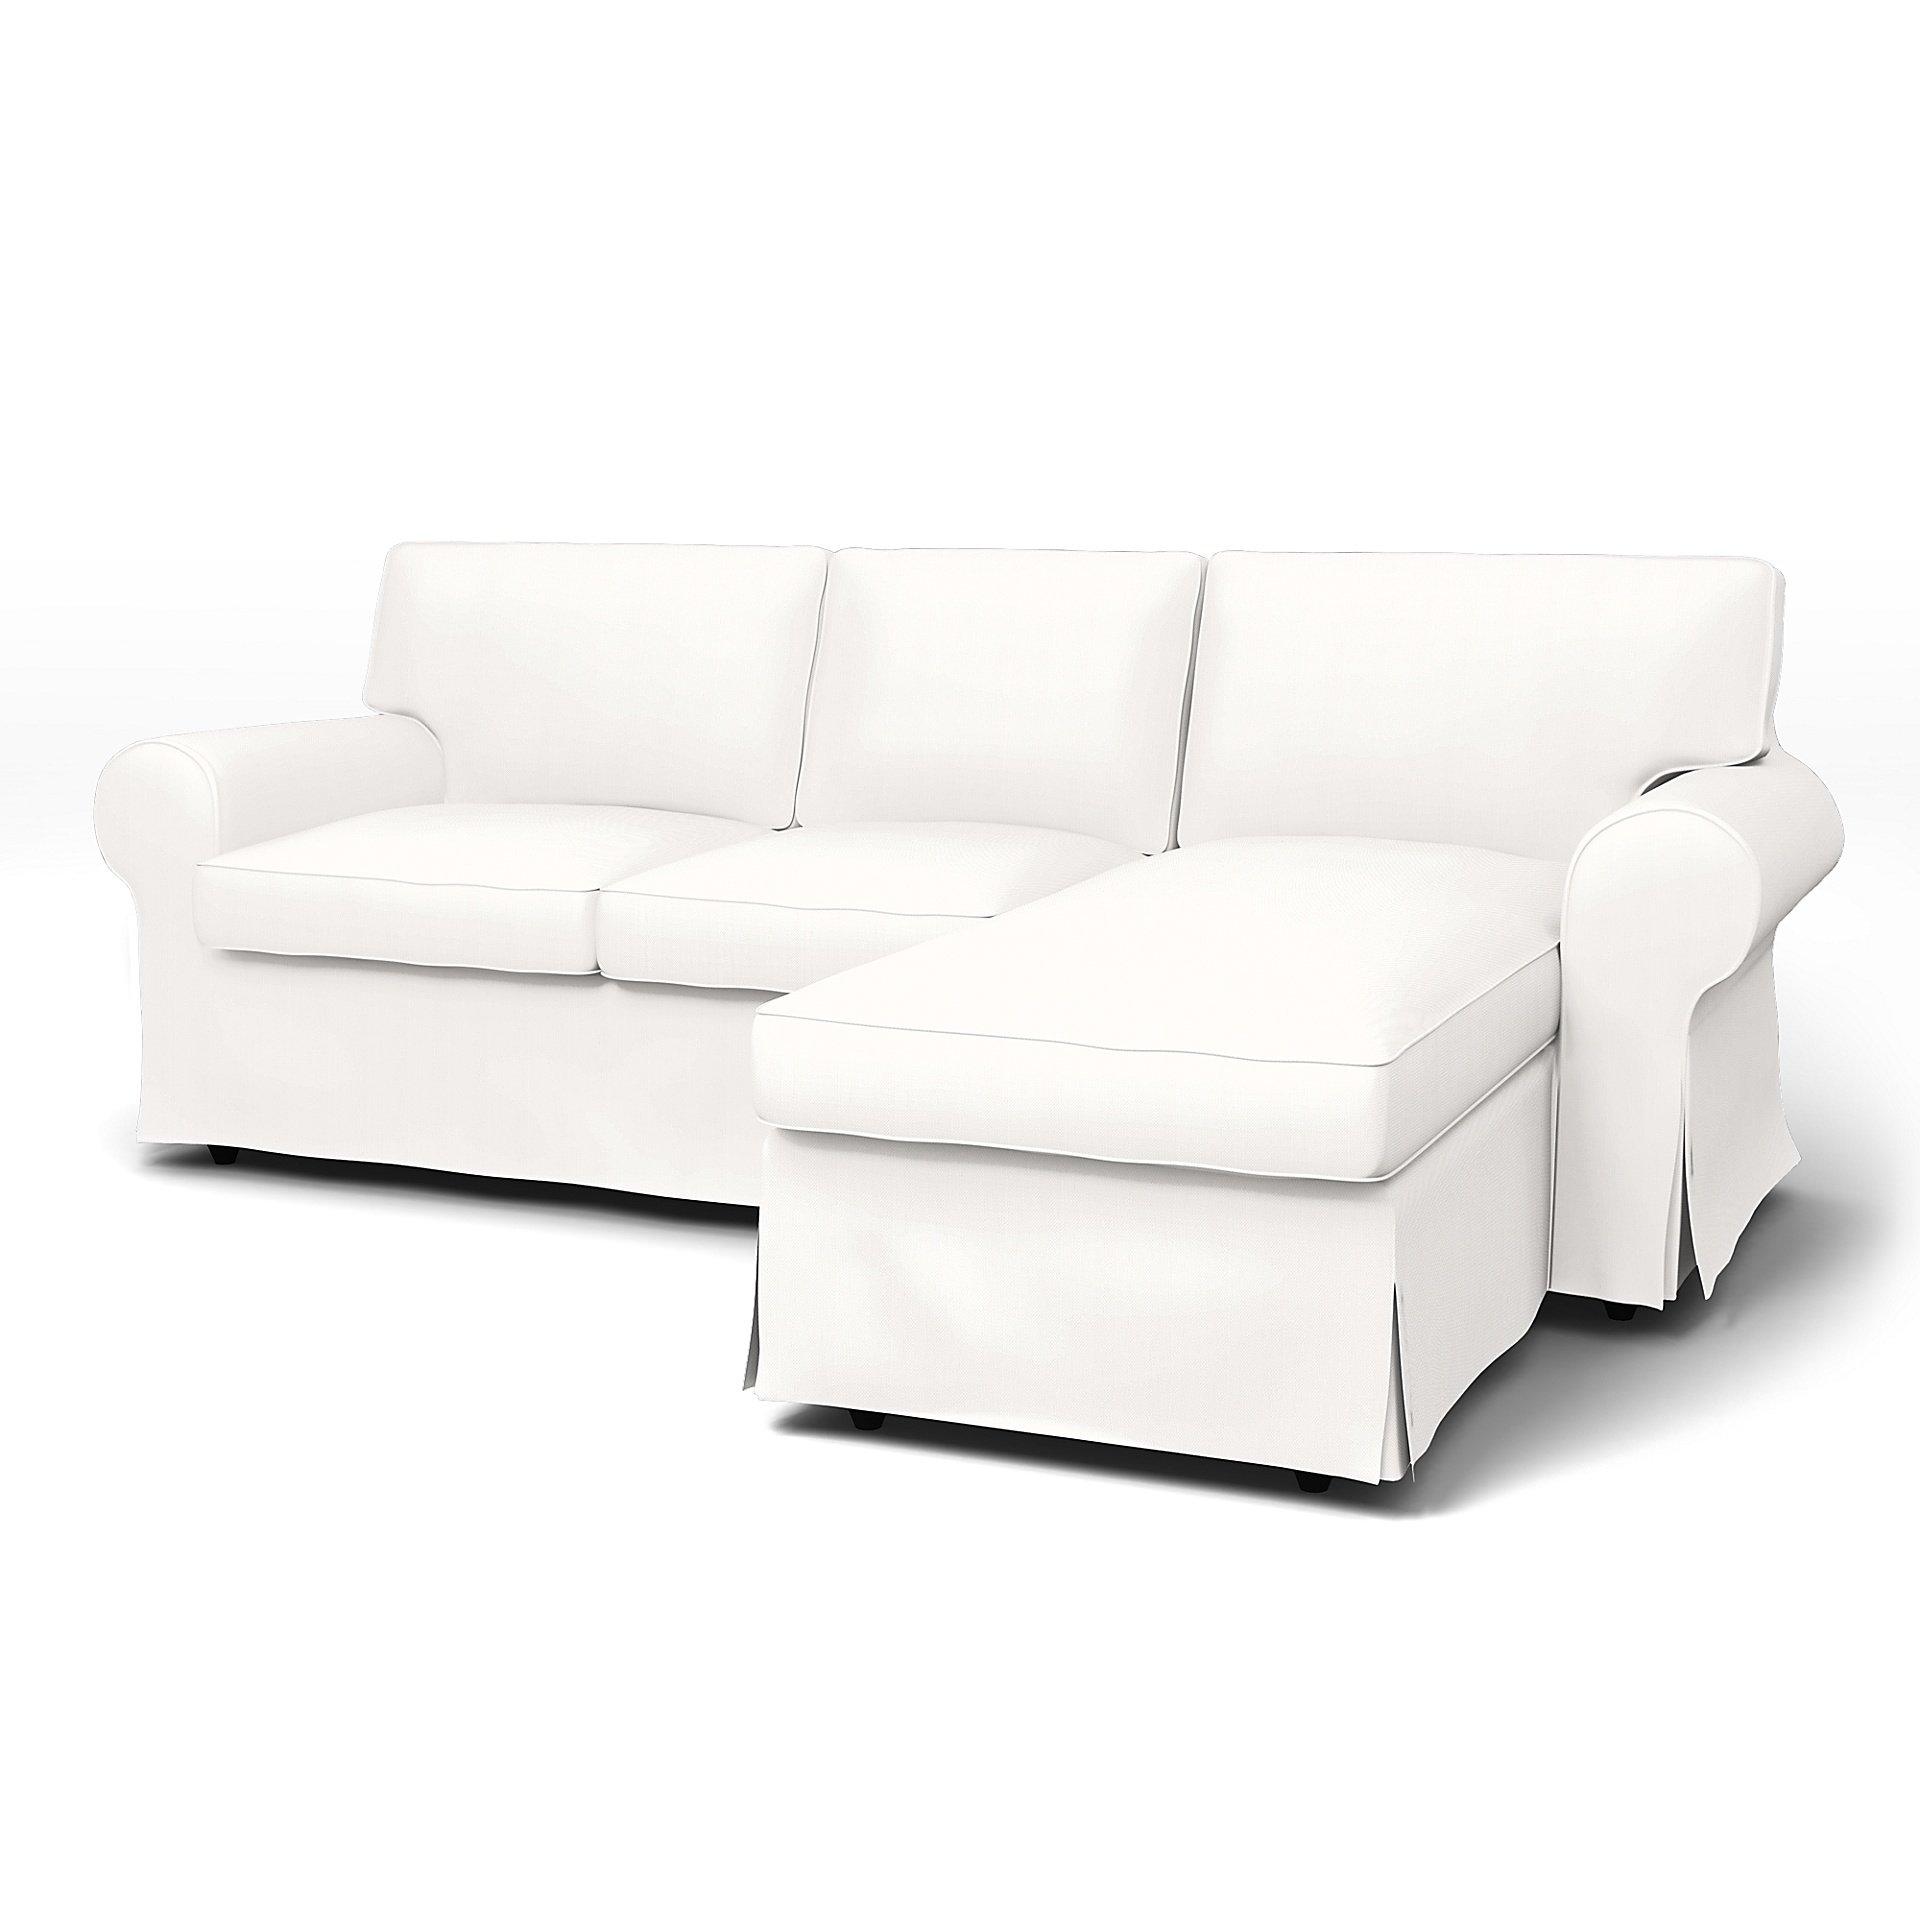 IKEA - Ektorp 3 Seater Sofa with Chaise Cover, Soft White, Linen - Bemz